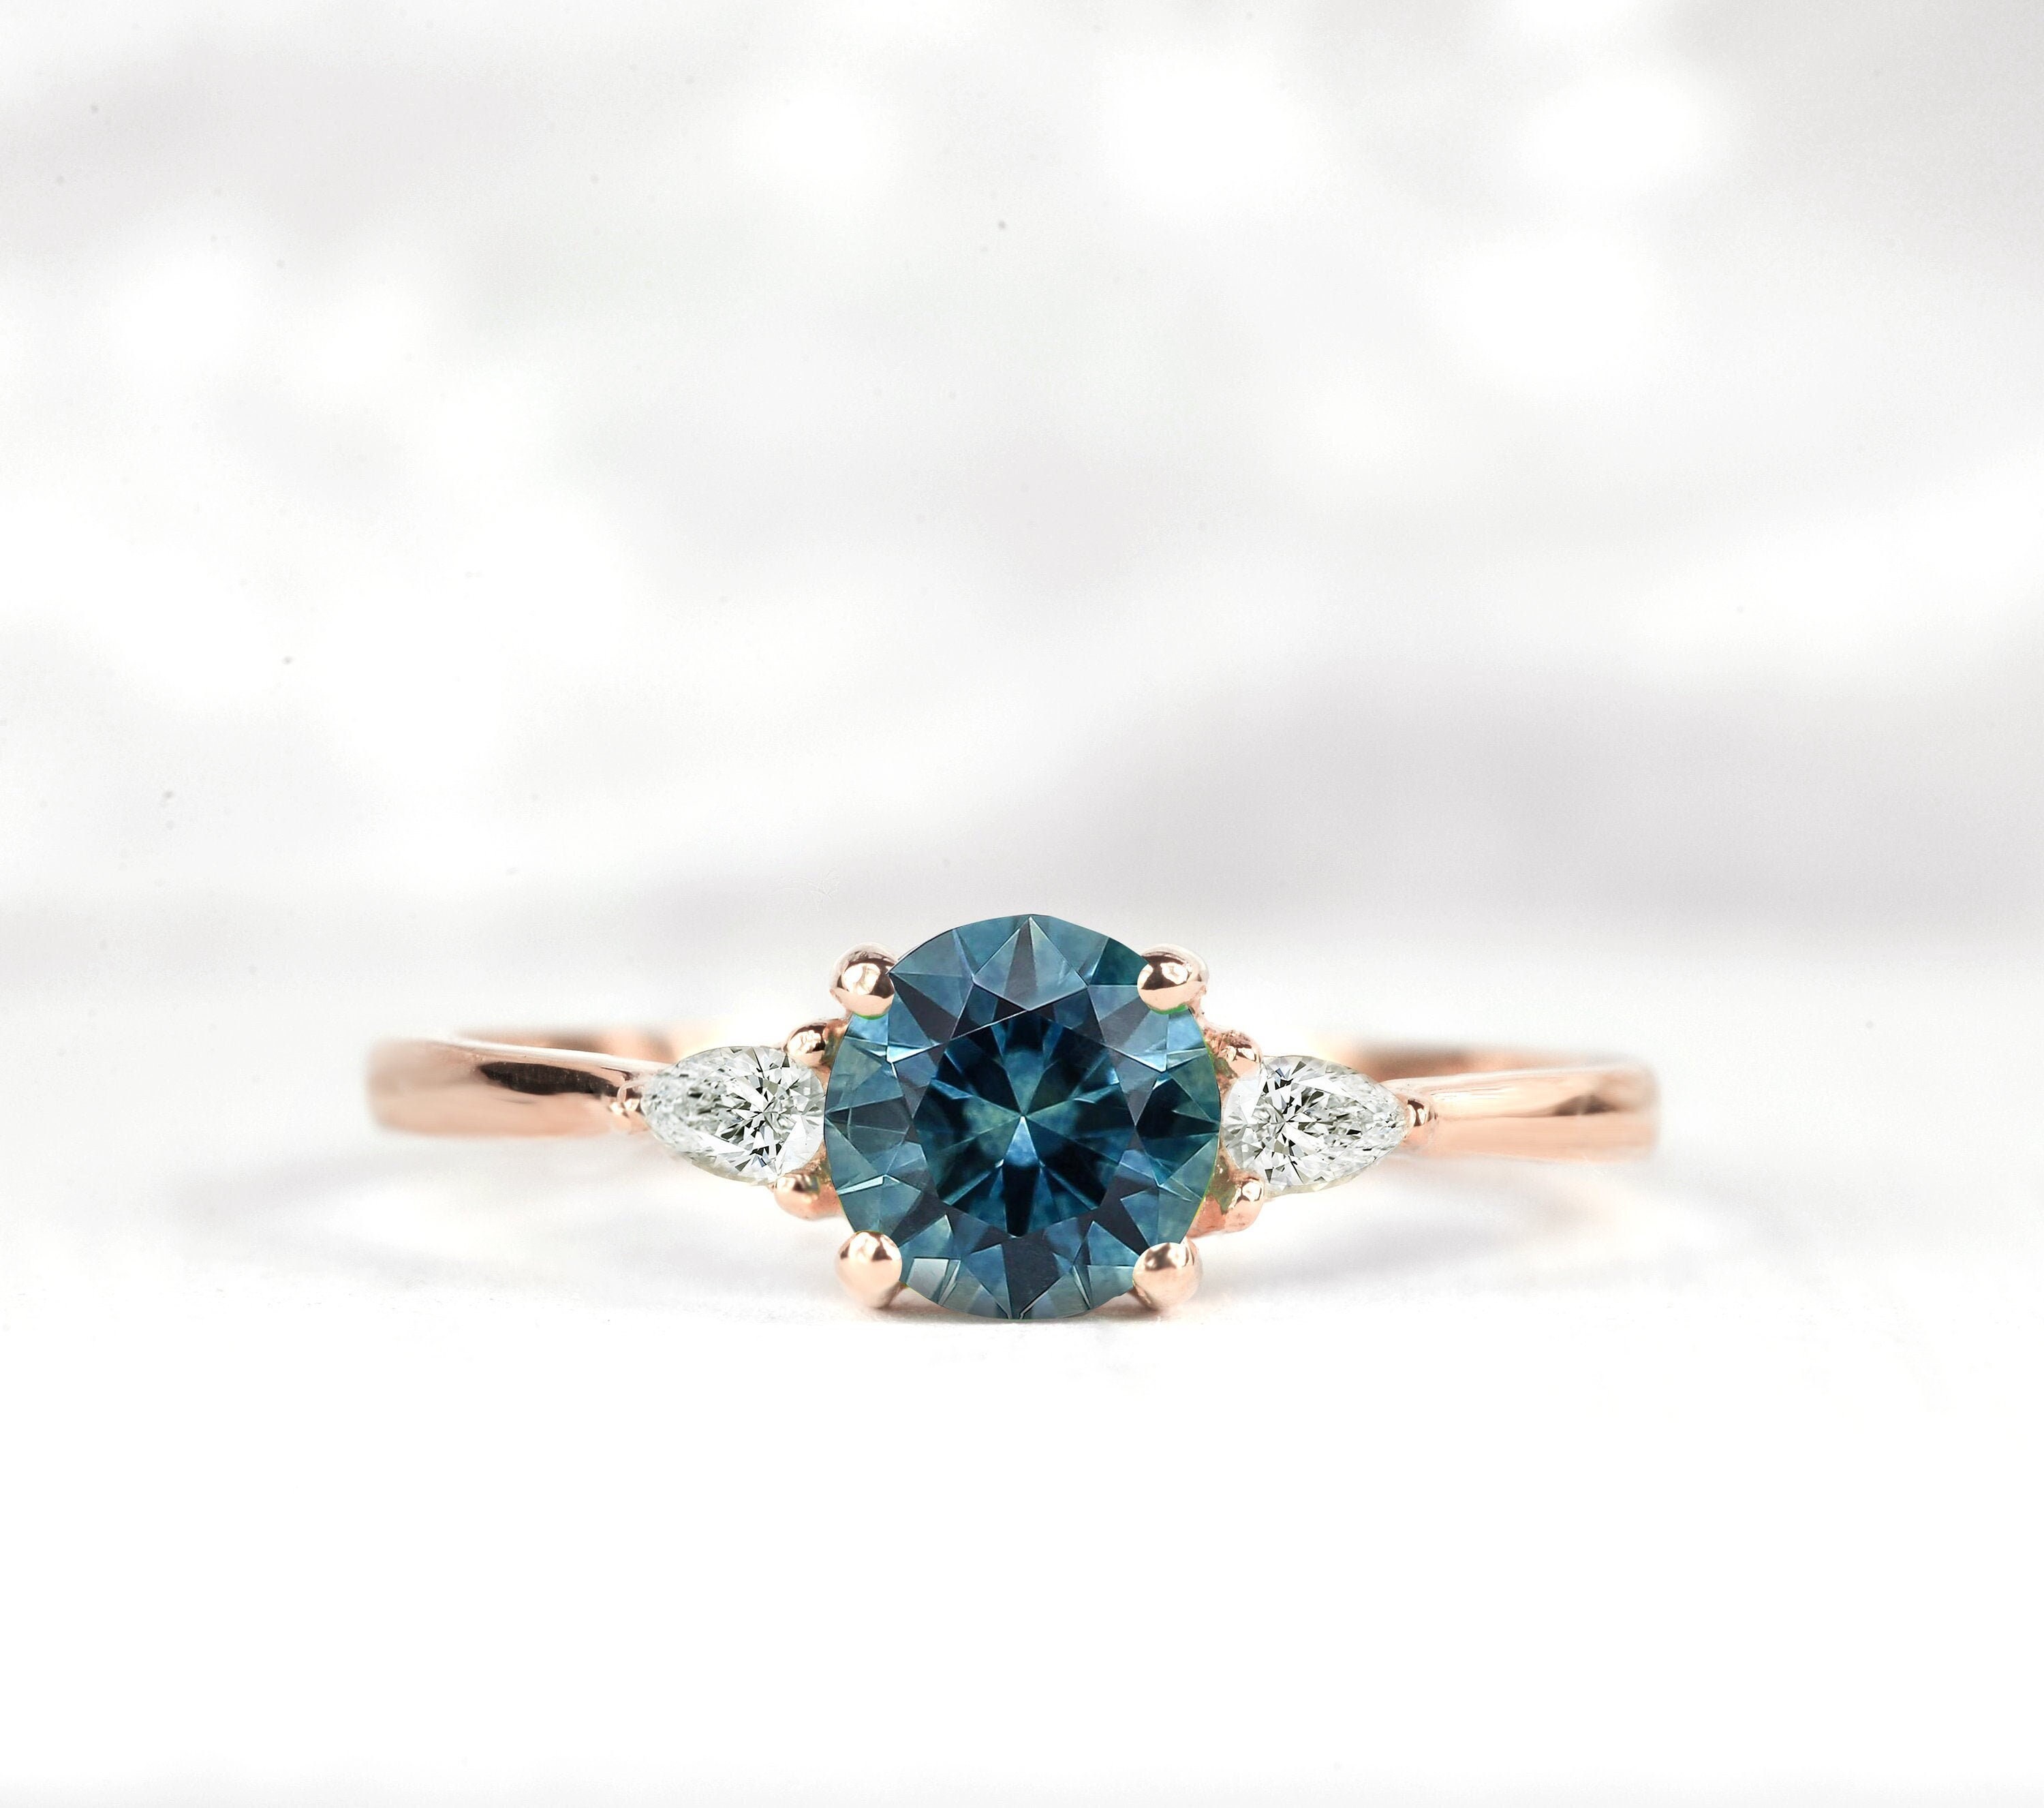 Teal Sapphire Engagement Ring, Green Peacock Blue Sapphire, Blue Green 14K Rose Gold Ring